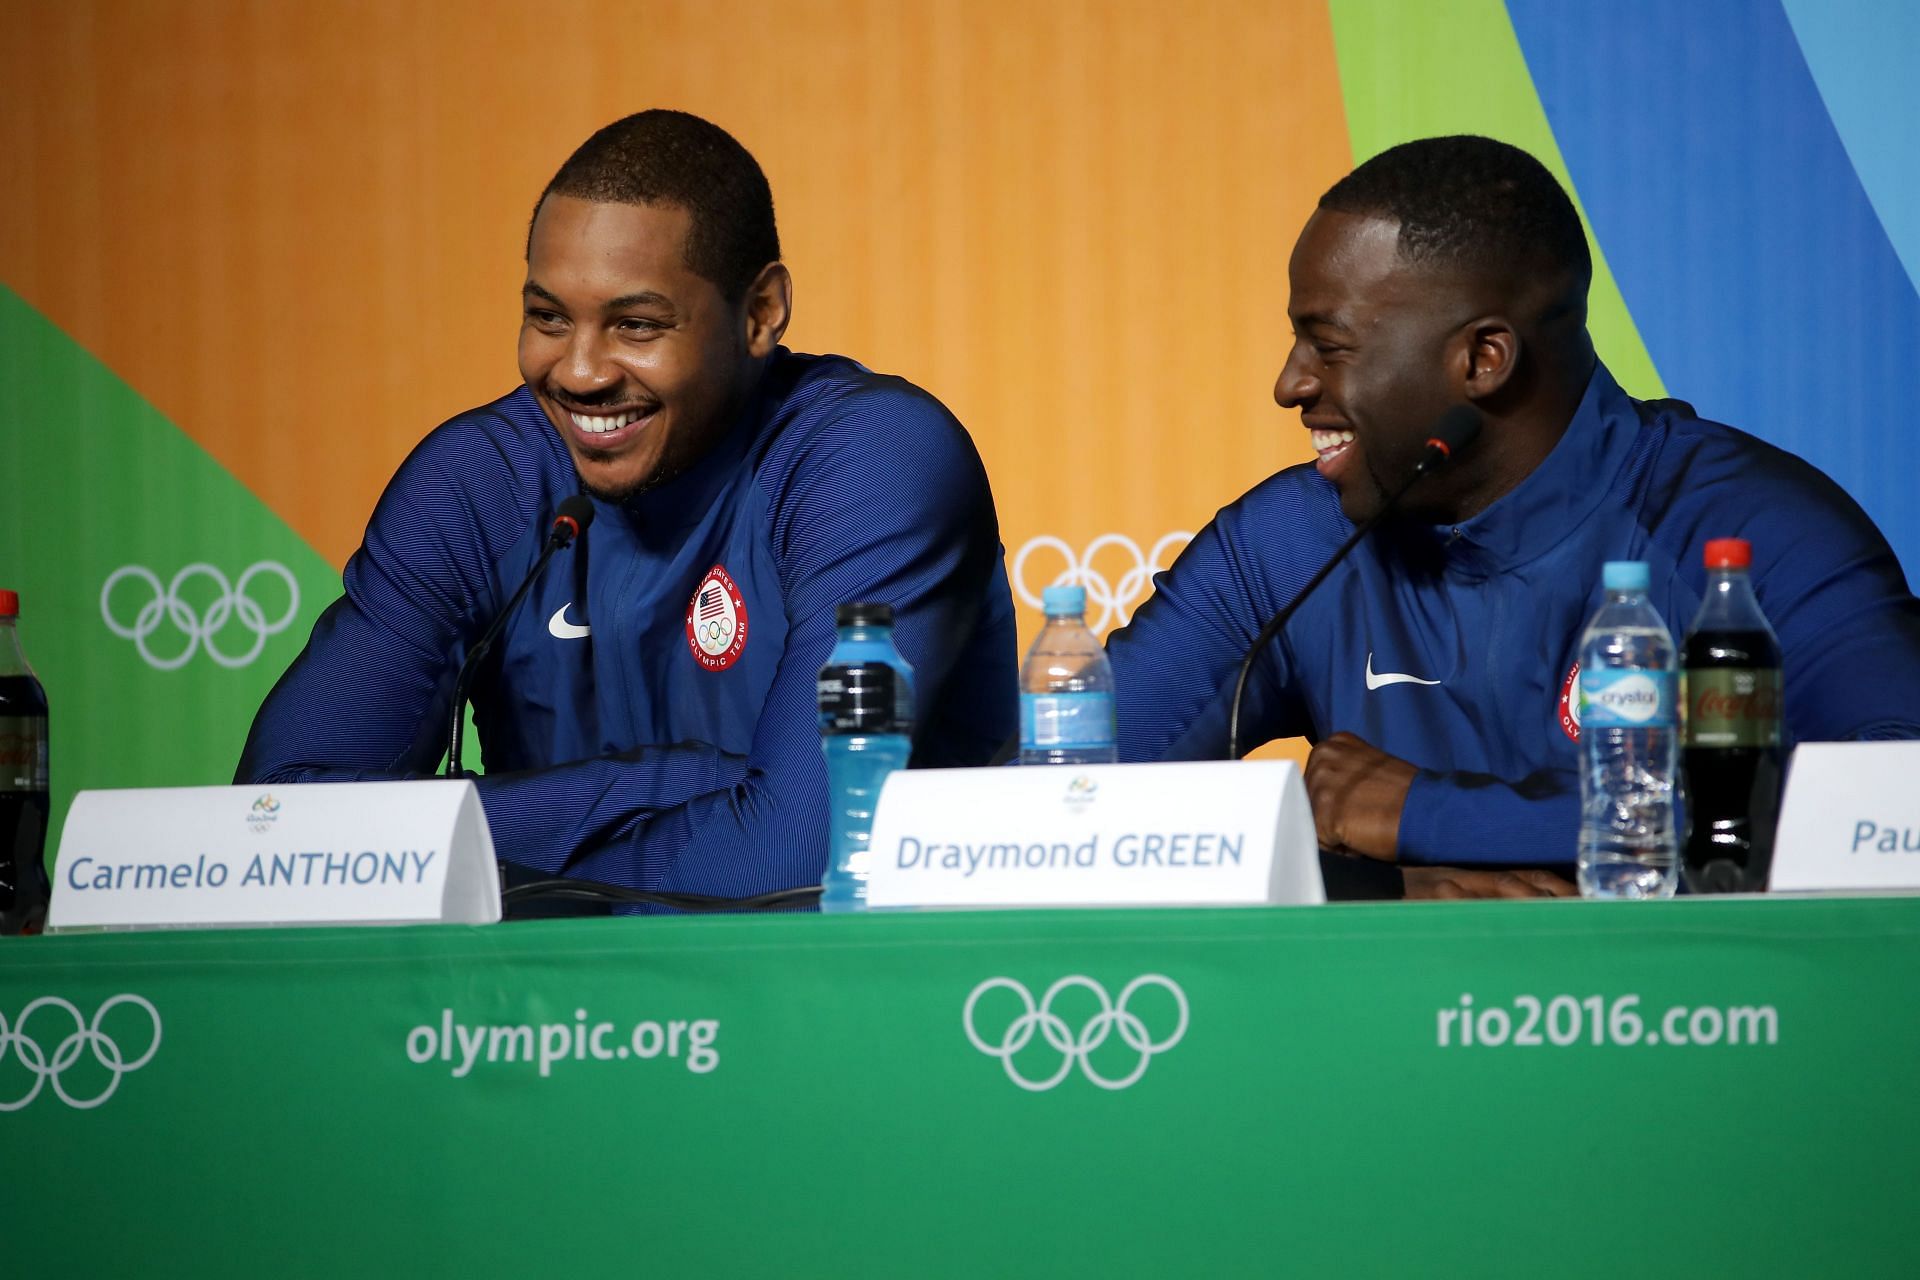 Carmelo Anthony and Draymond Green at Olympics - Previews - Day -1